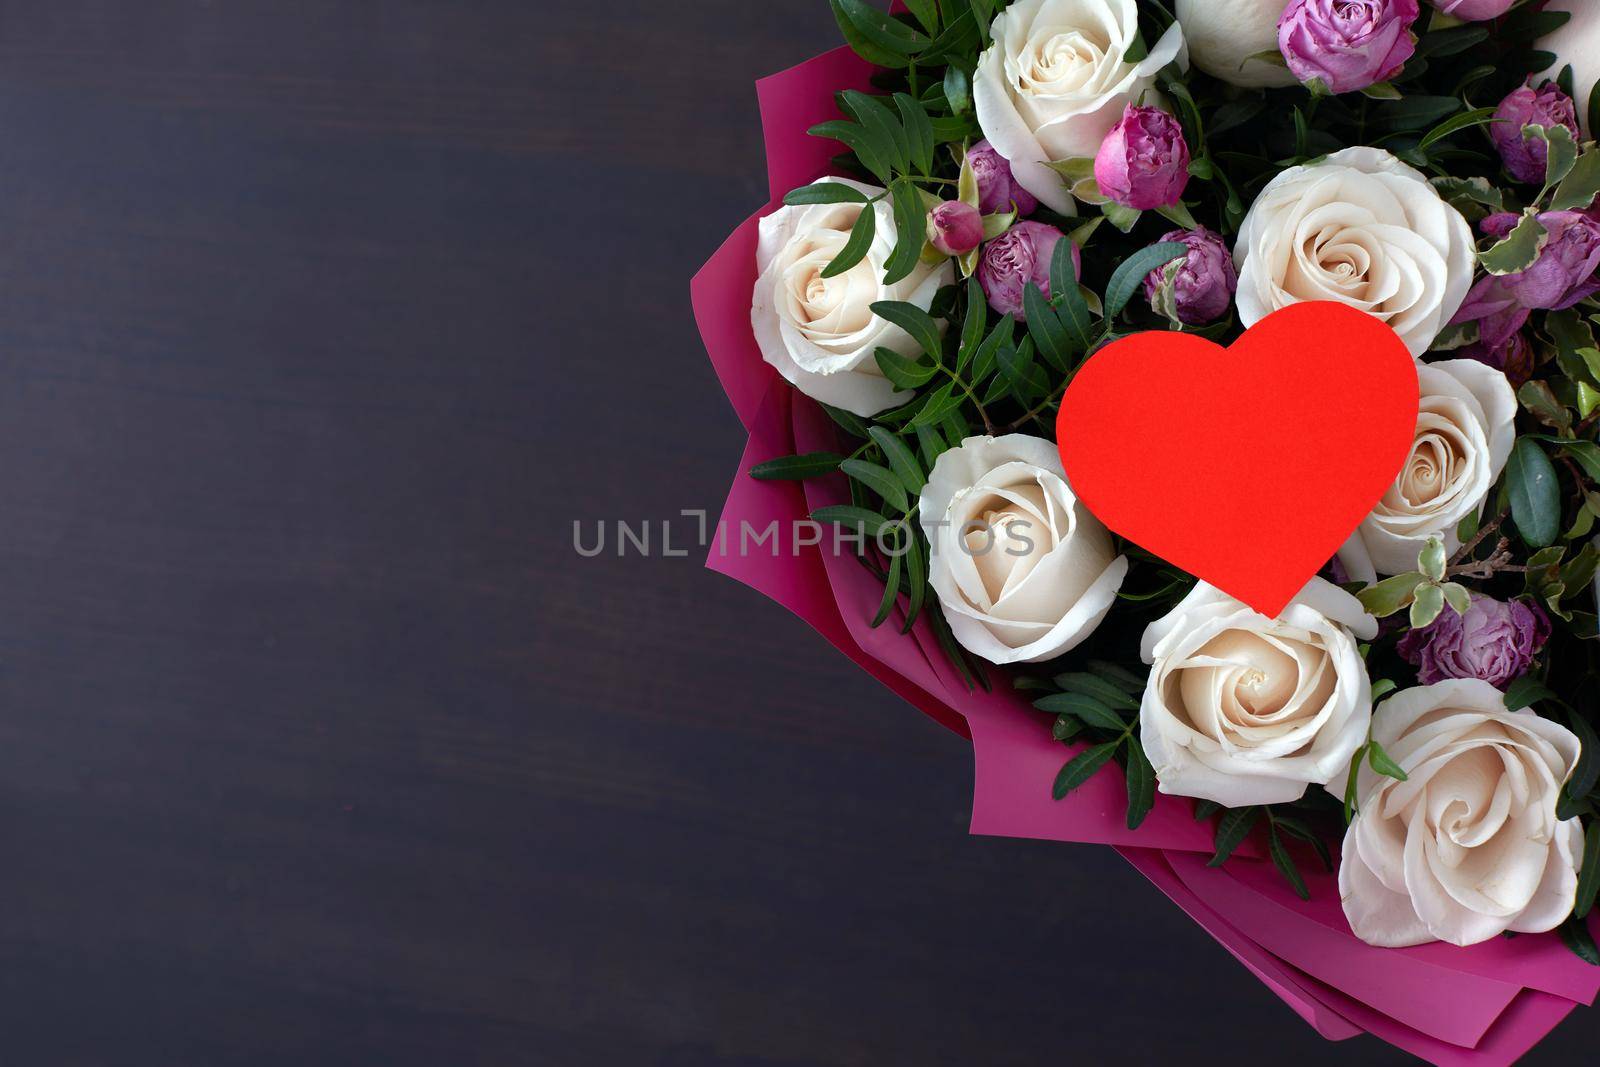 Valentines day greeting card with rose flowers bouquet dark background with space for your greetings. Top view flat lay